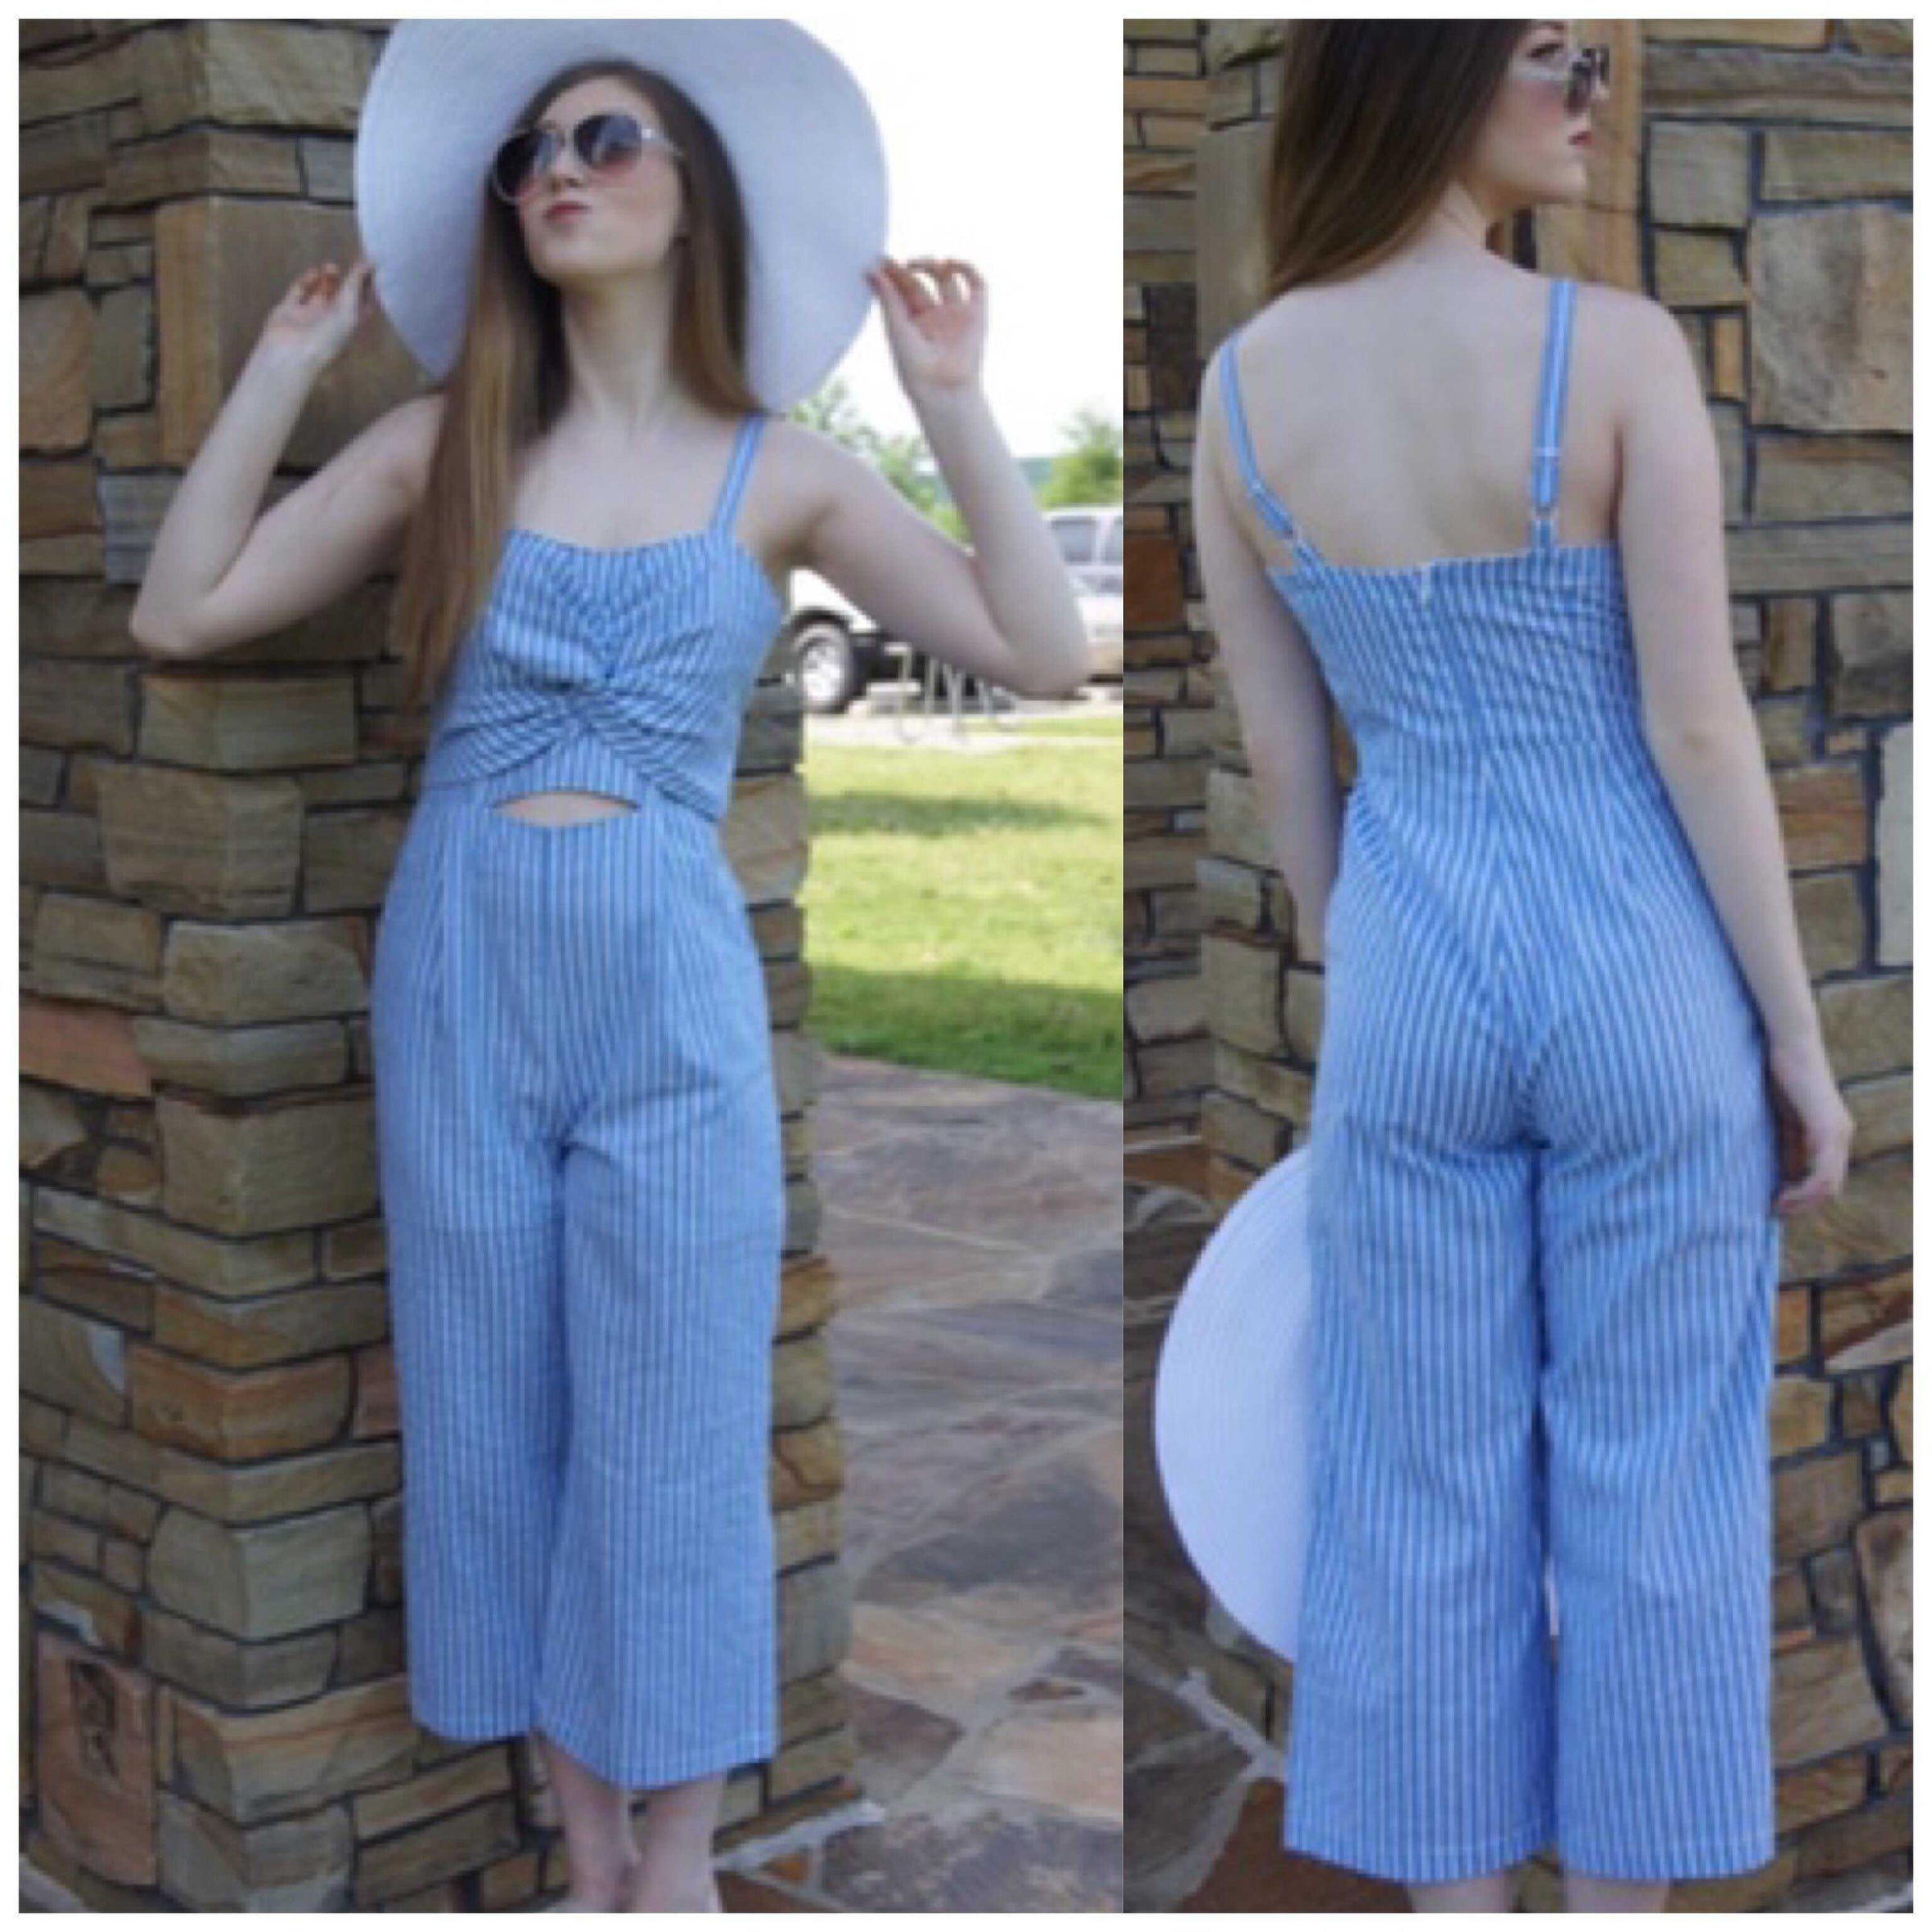 Blue And White Stripe Me Down Wide Legged JumpSuit - TheBrownEyedGirl Boutique